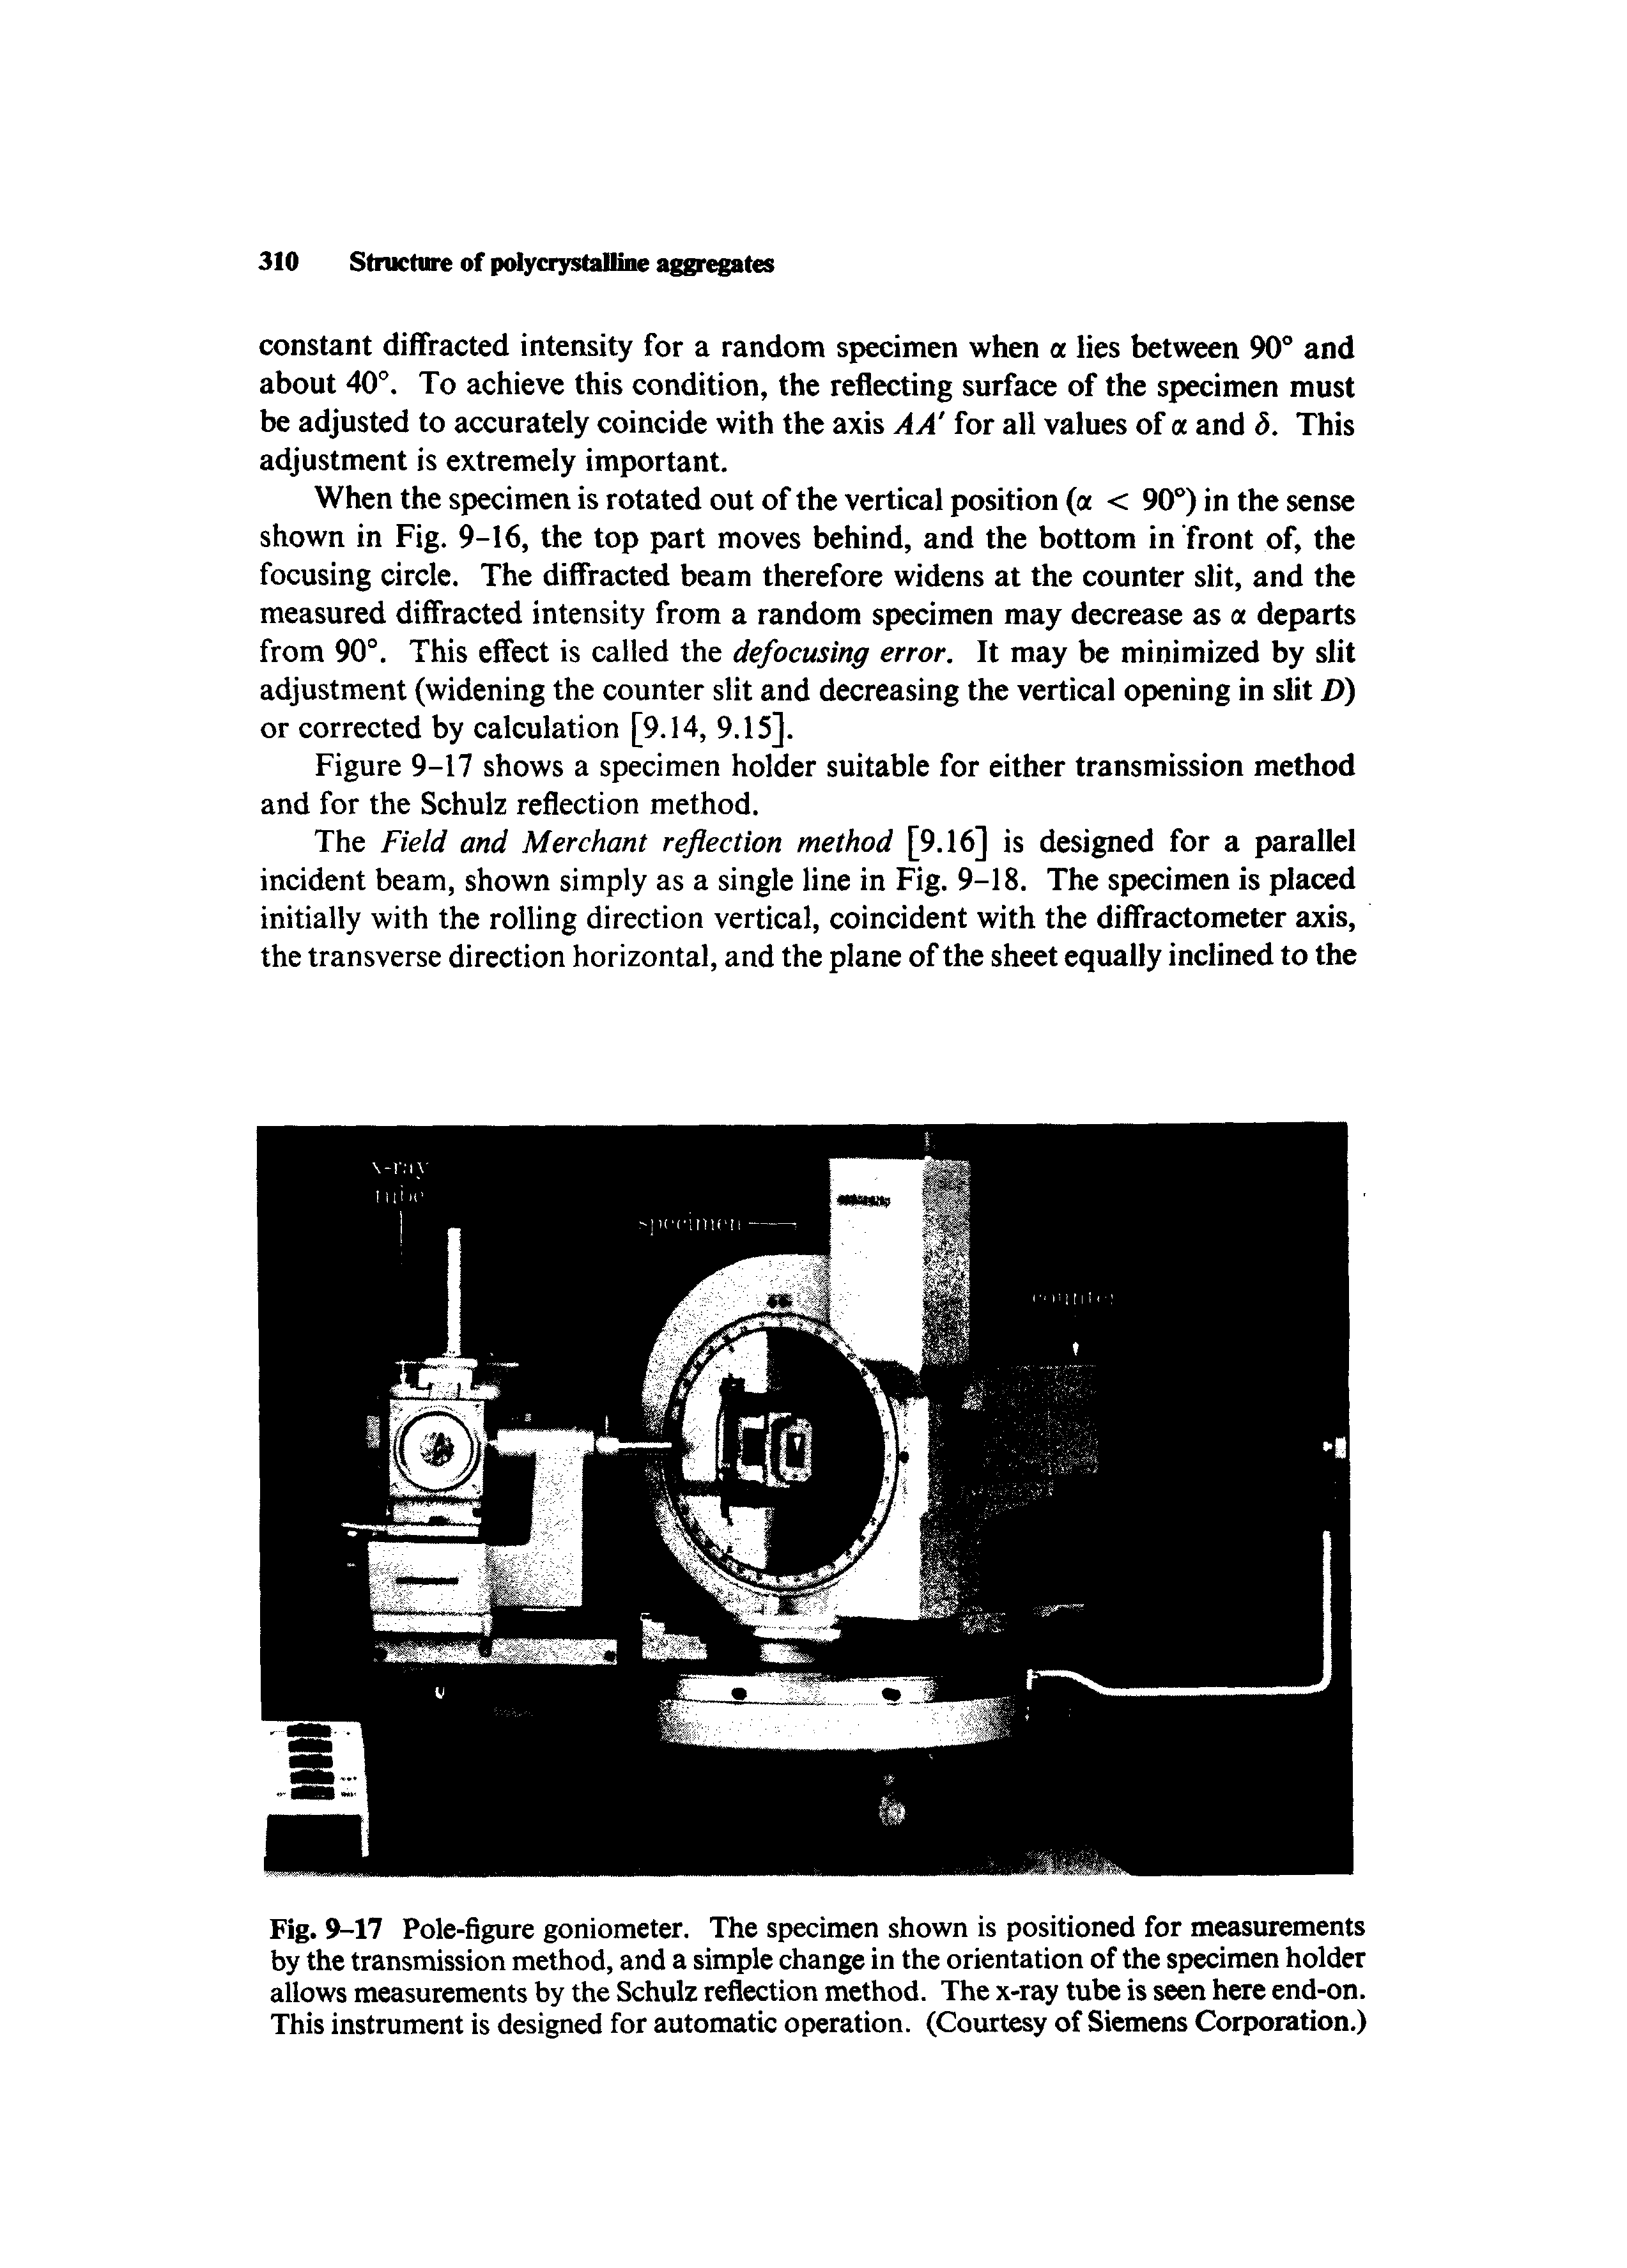 Fig. 9-17 Pole-figure goniometer. The specimen shown is positioned for measurements by the transmission method, and a simple change in the orientation of the specimen holder allows measurements by the Schulz reflection method. The x-ray tube is seen here end-on. This instrument is designed for automatic operation. (Courtesy of Siemens Corporation.)...